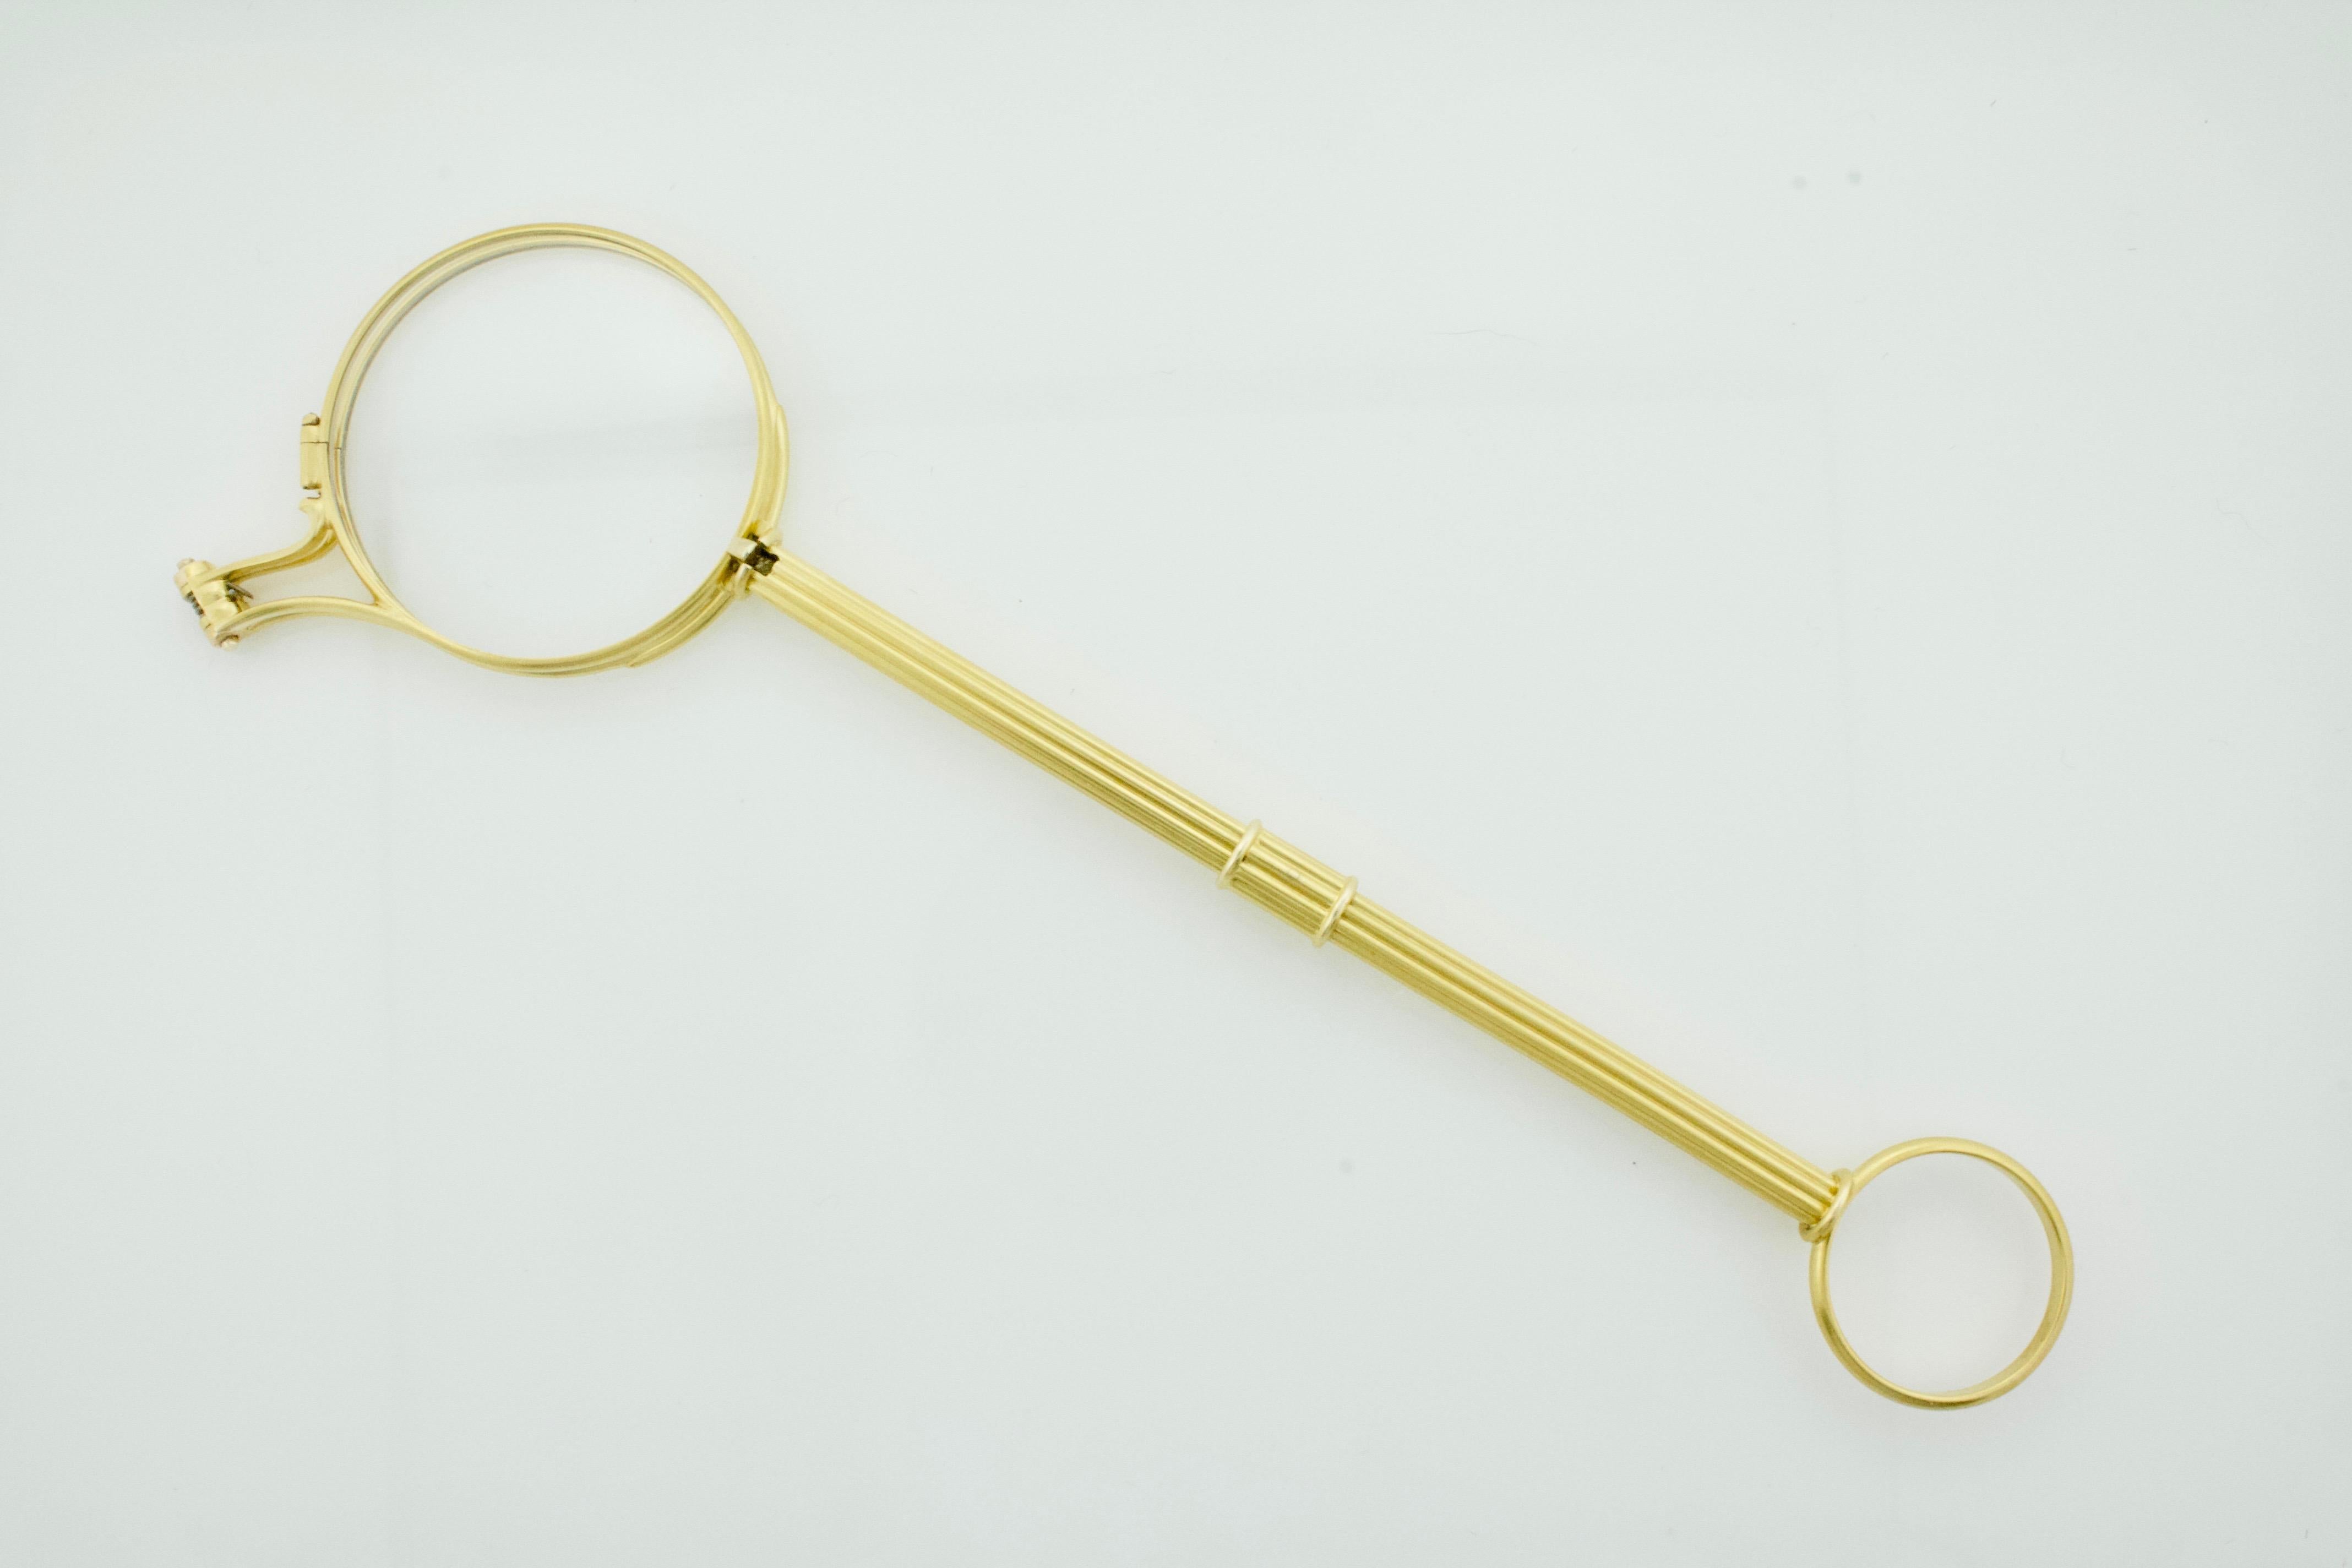 Lorgnette in 18k Yellow Gold Circa 1900 With Spring Action 
When The Jones's Pull Out Their Readers You Spring This Lorgnette Open and Win!
The Lenses Can Be Changed By Your Optometrist To Fit Your Eyes 
61/2 Inches In Length 
The Video Was Shot in